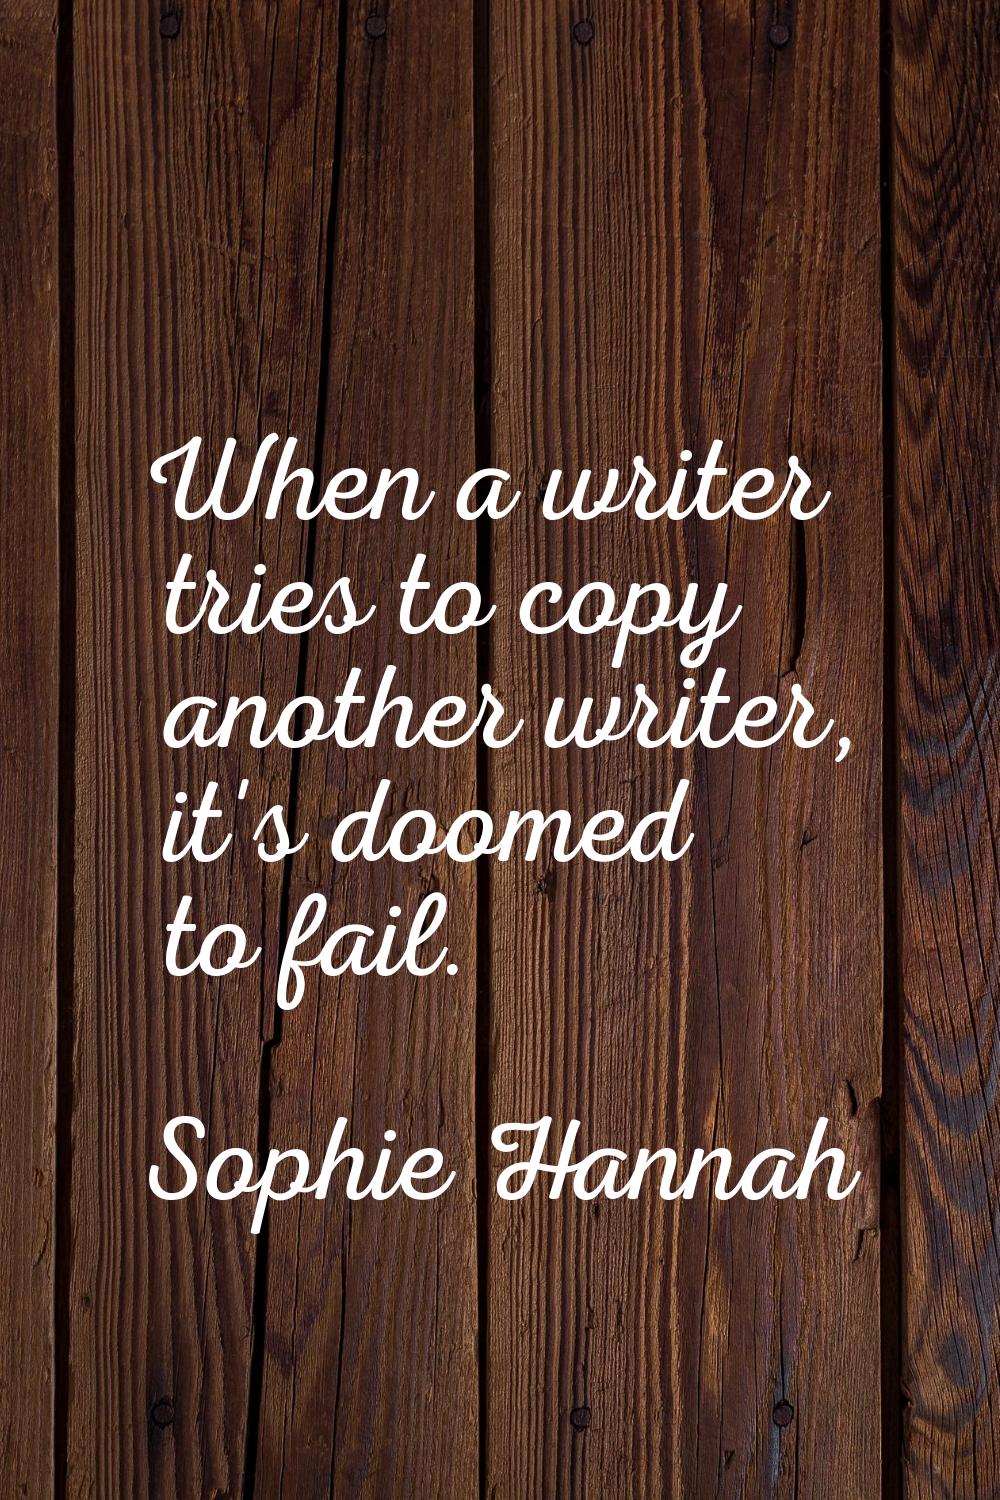 When a writer tries to copy another writer, it's doomed to fail.